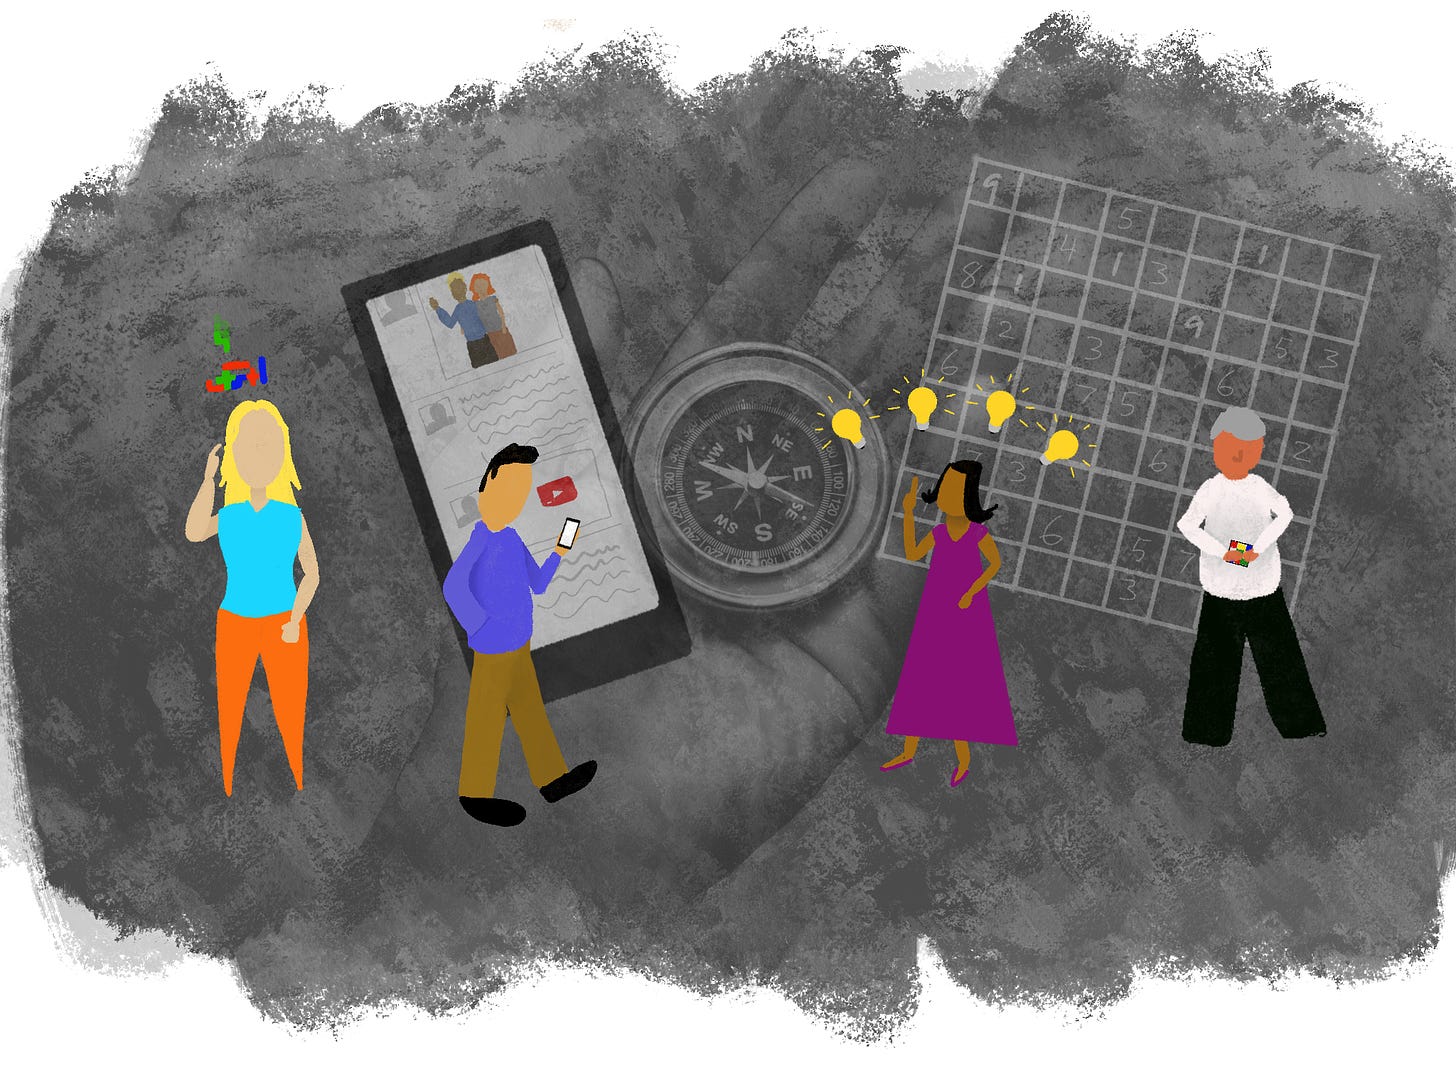 A drawing of several people being distracted by various things: Tetris game, social media on a smartphone, lots of idea light bulbs appearing, and a Rubik's cube